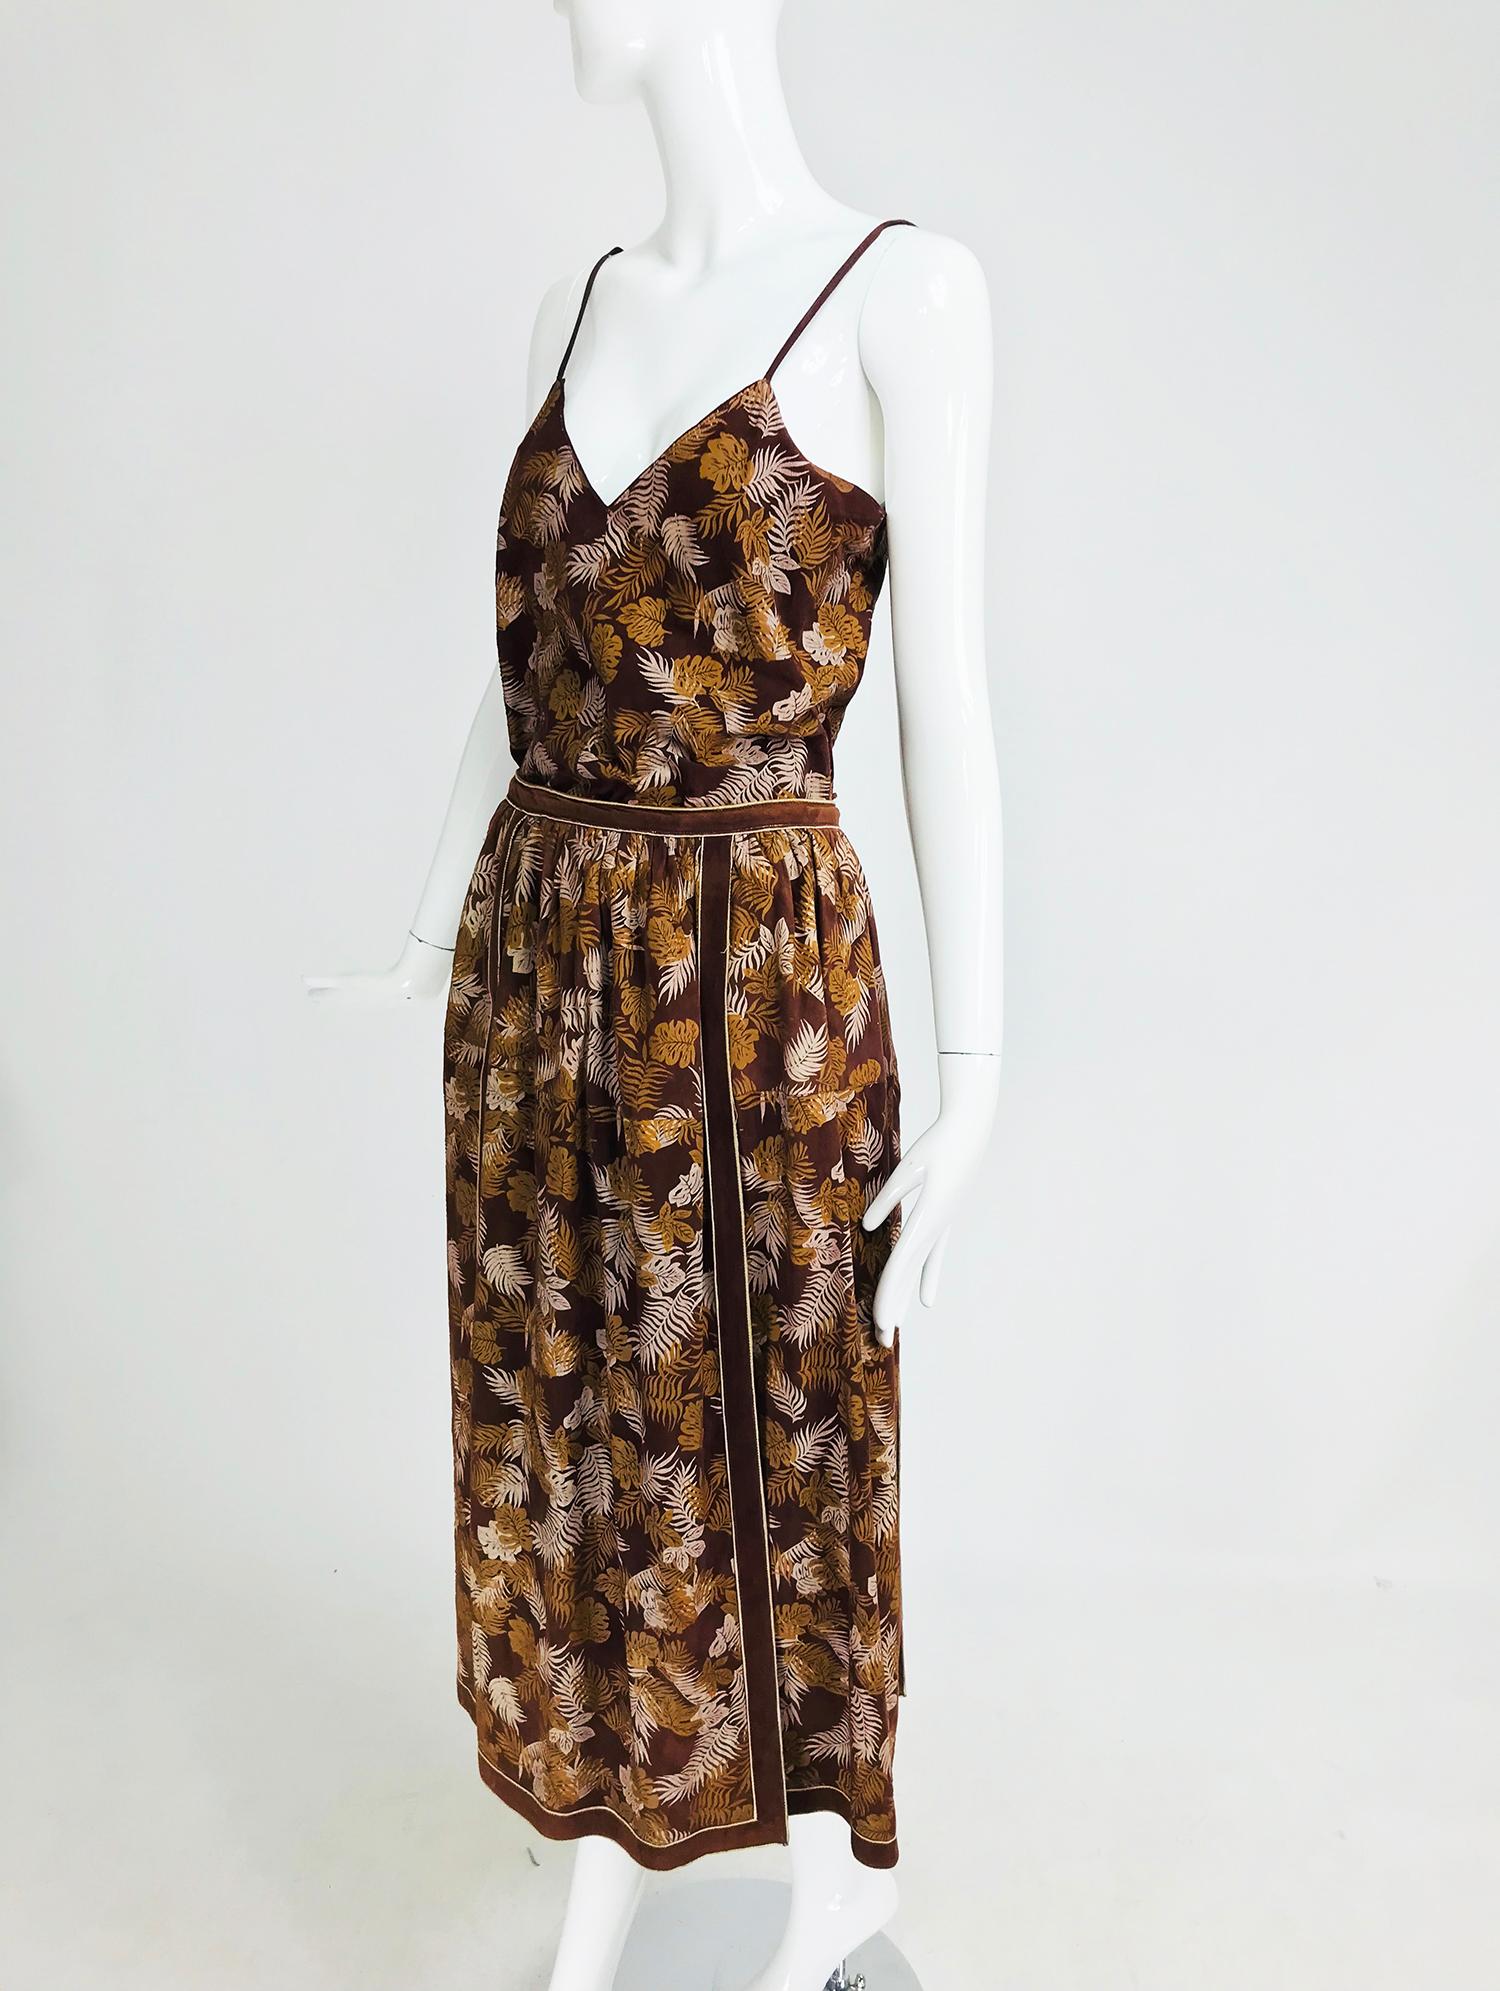 Roberto Cavalli 1970s printed suede top and skirt set rare to find. Roberto Cavalli came from an artistic family and studded at the Academy of Art in Florence, he decided not to become a painter, instead experimenting by applying painterly